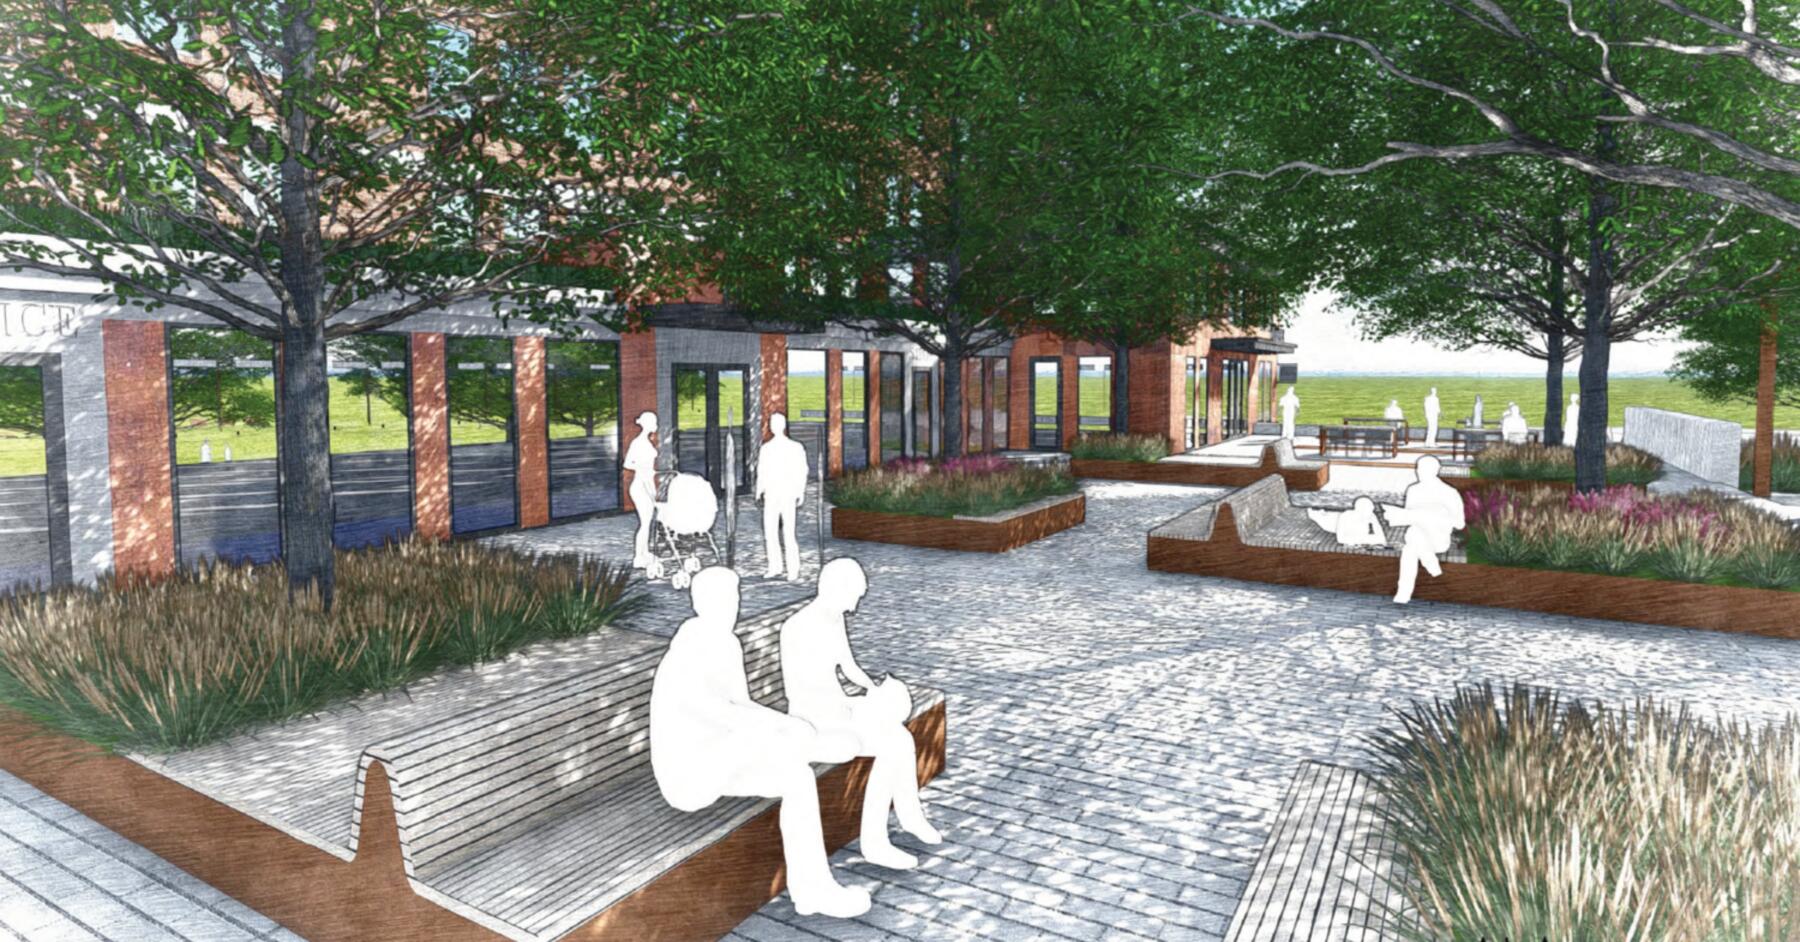 RENDERINGS COURTESY OF ACETO LANDSCAPE ARCHITECTS